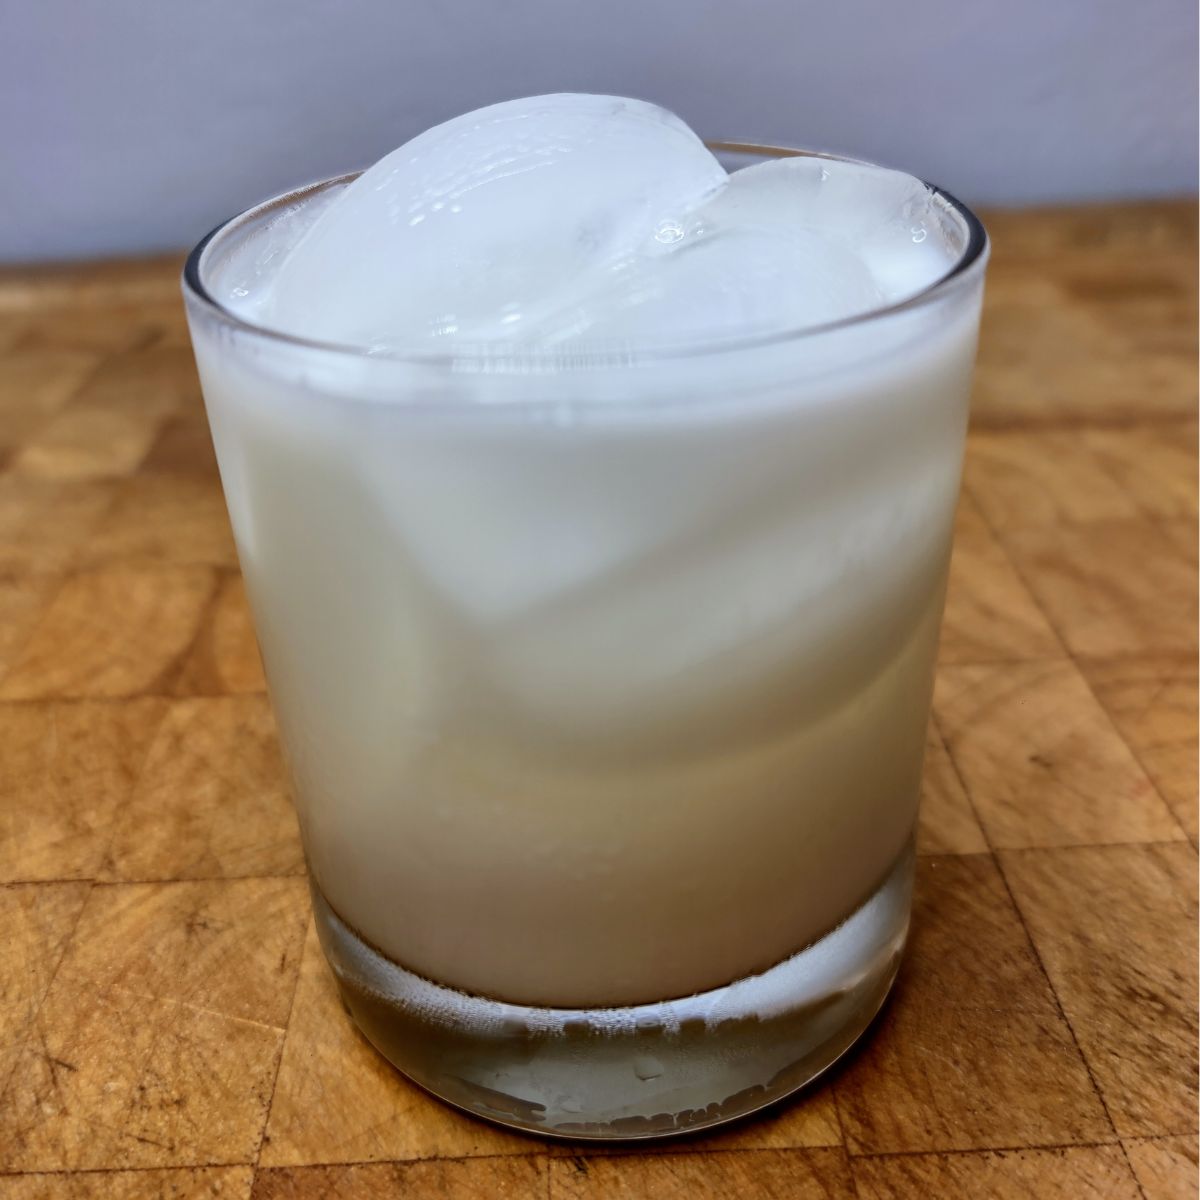 Vanilla milk in a rocks glass on a wooden table.